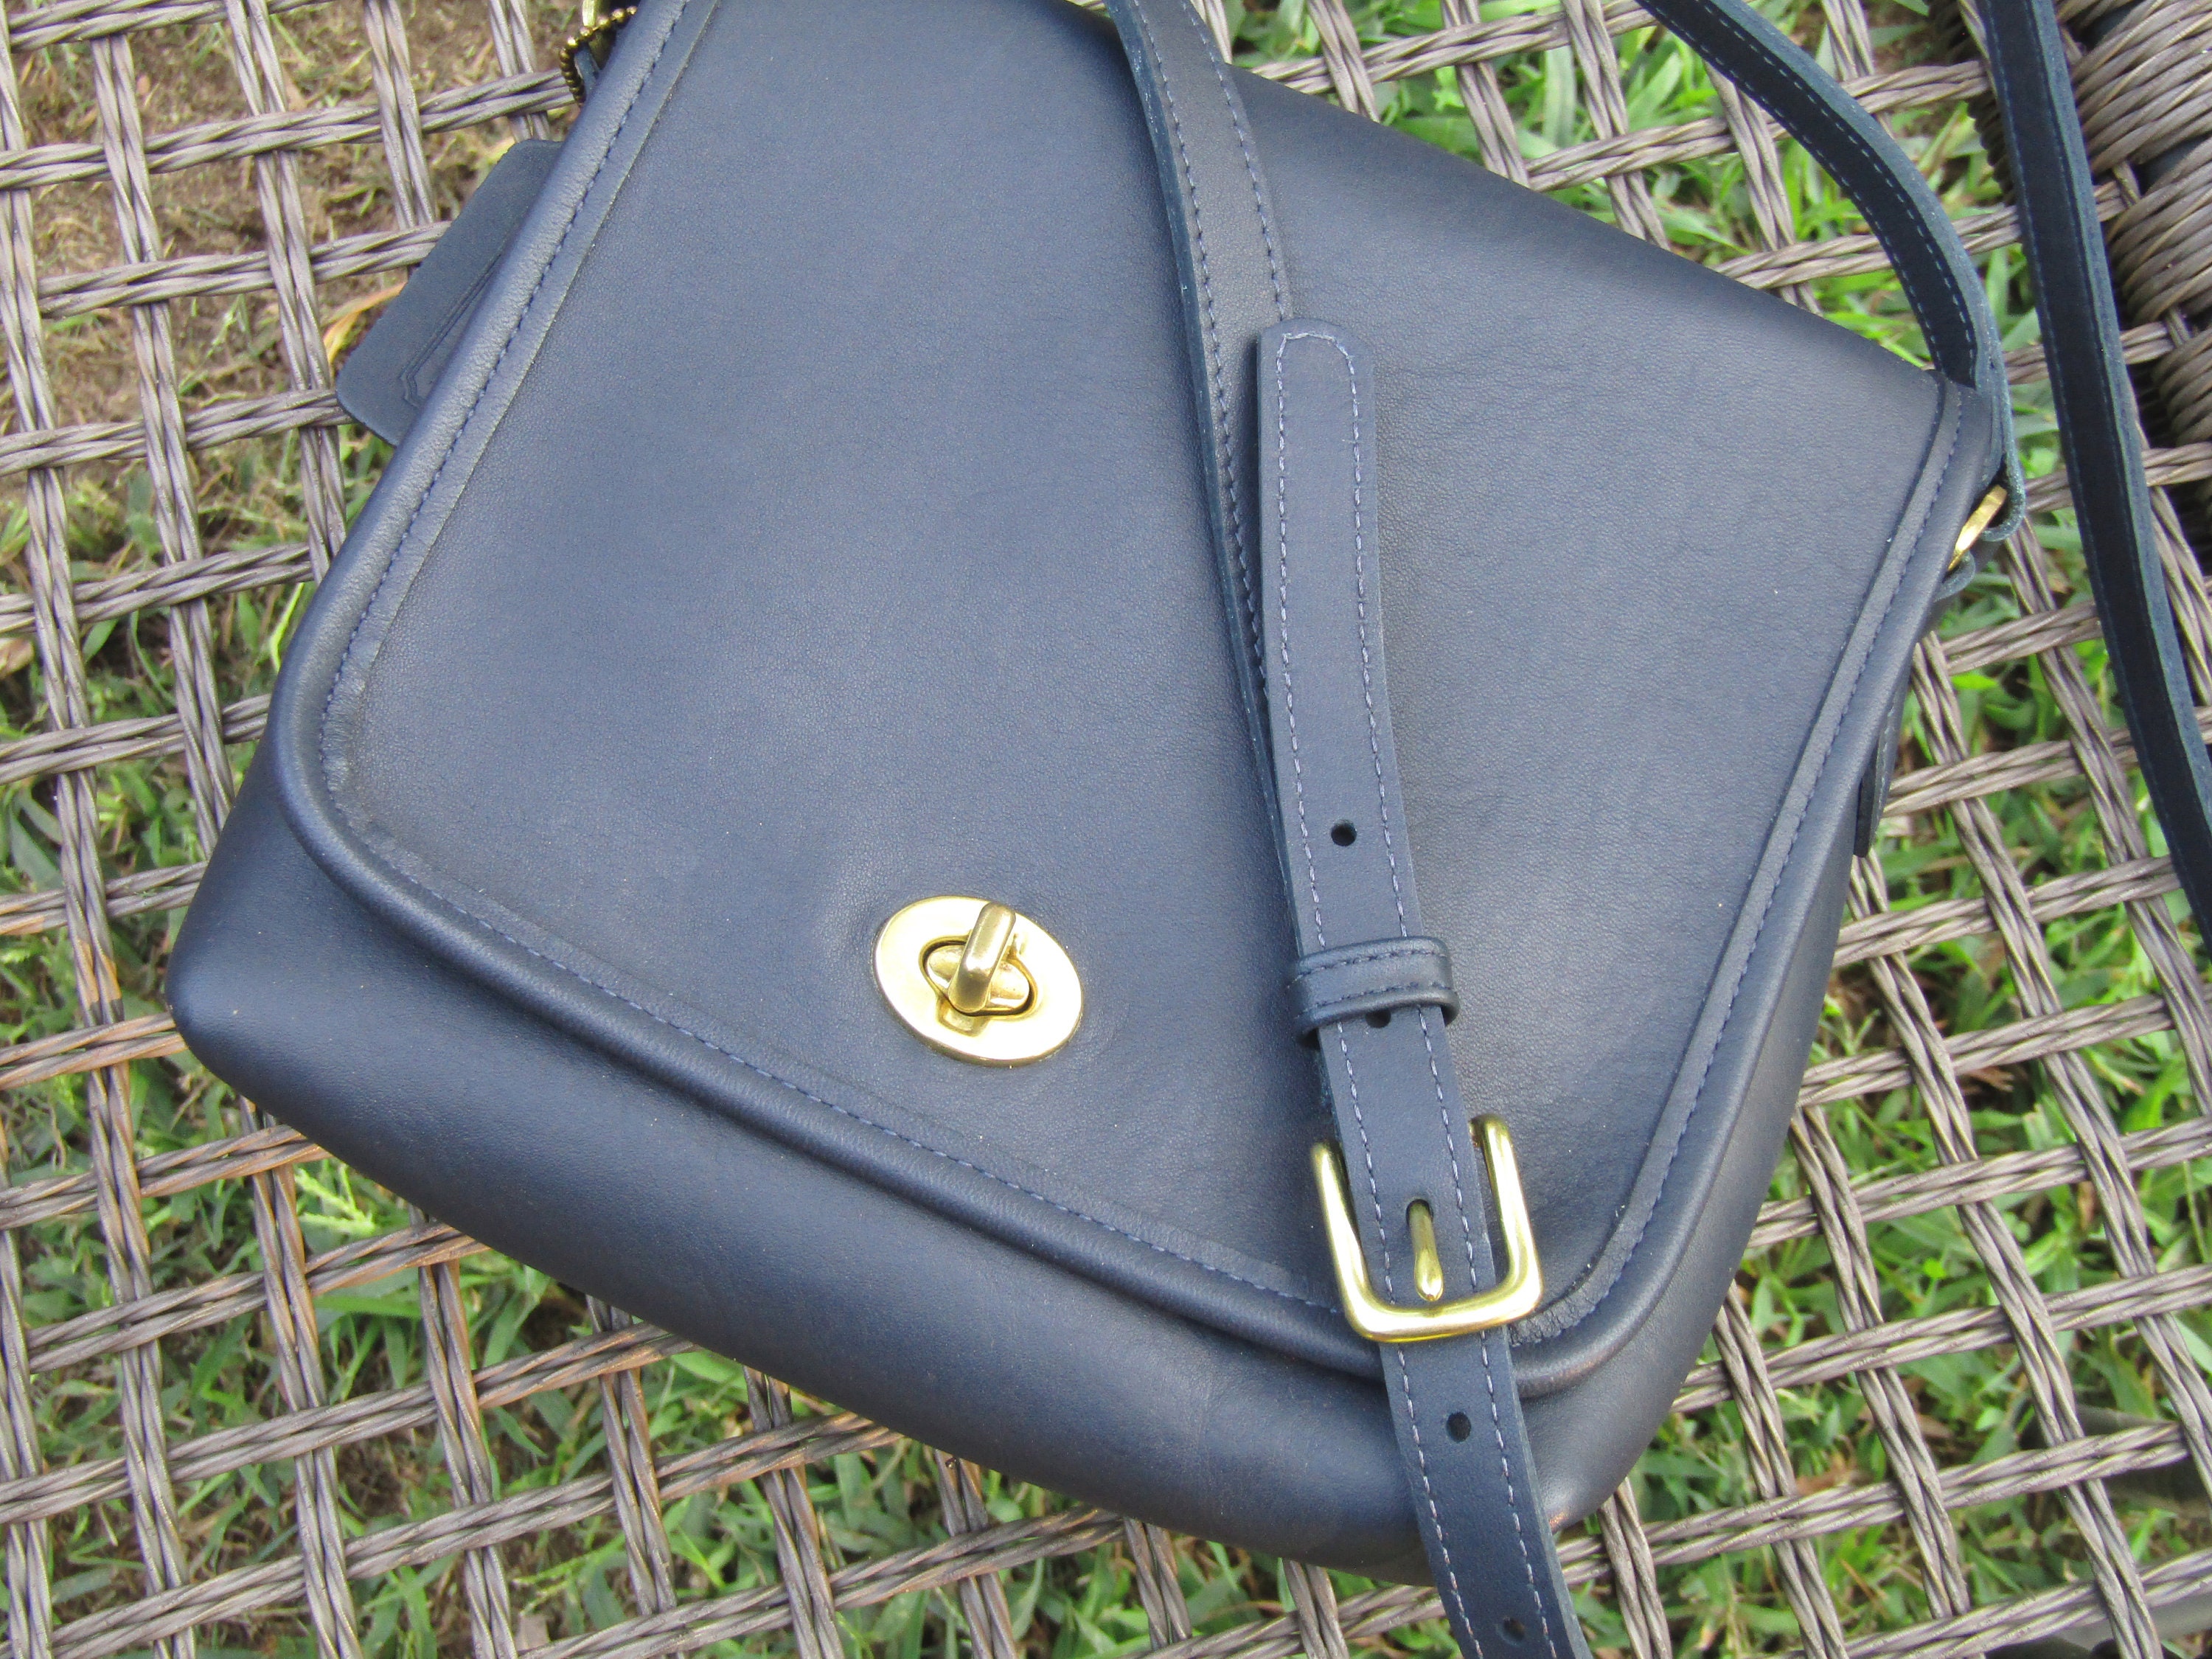 Vintage Coach Bag Companion Flap in Navy Blue Leather -  India